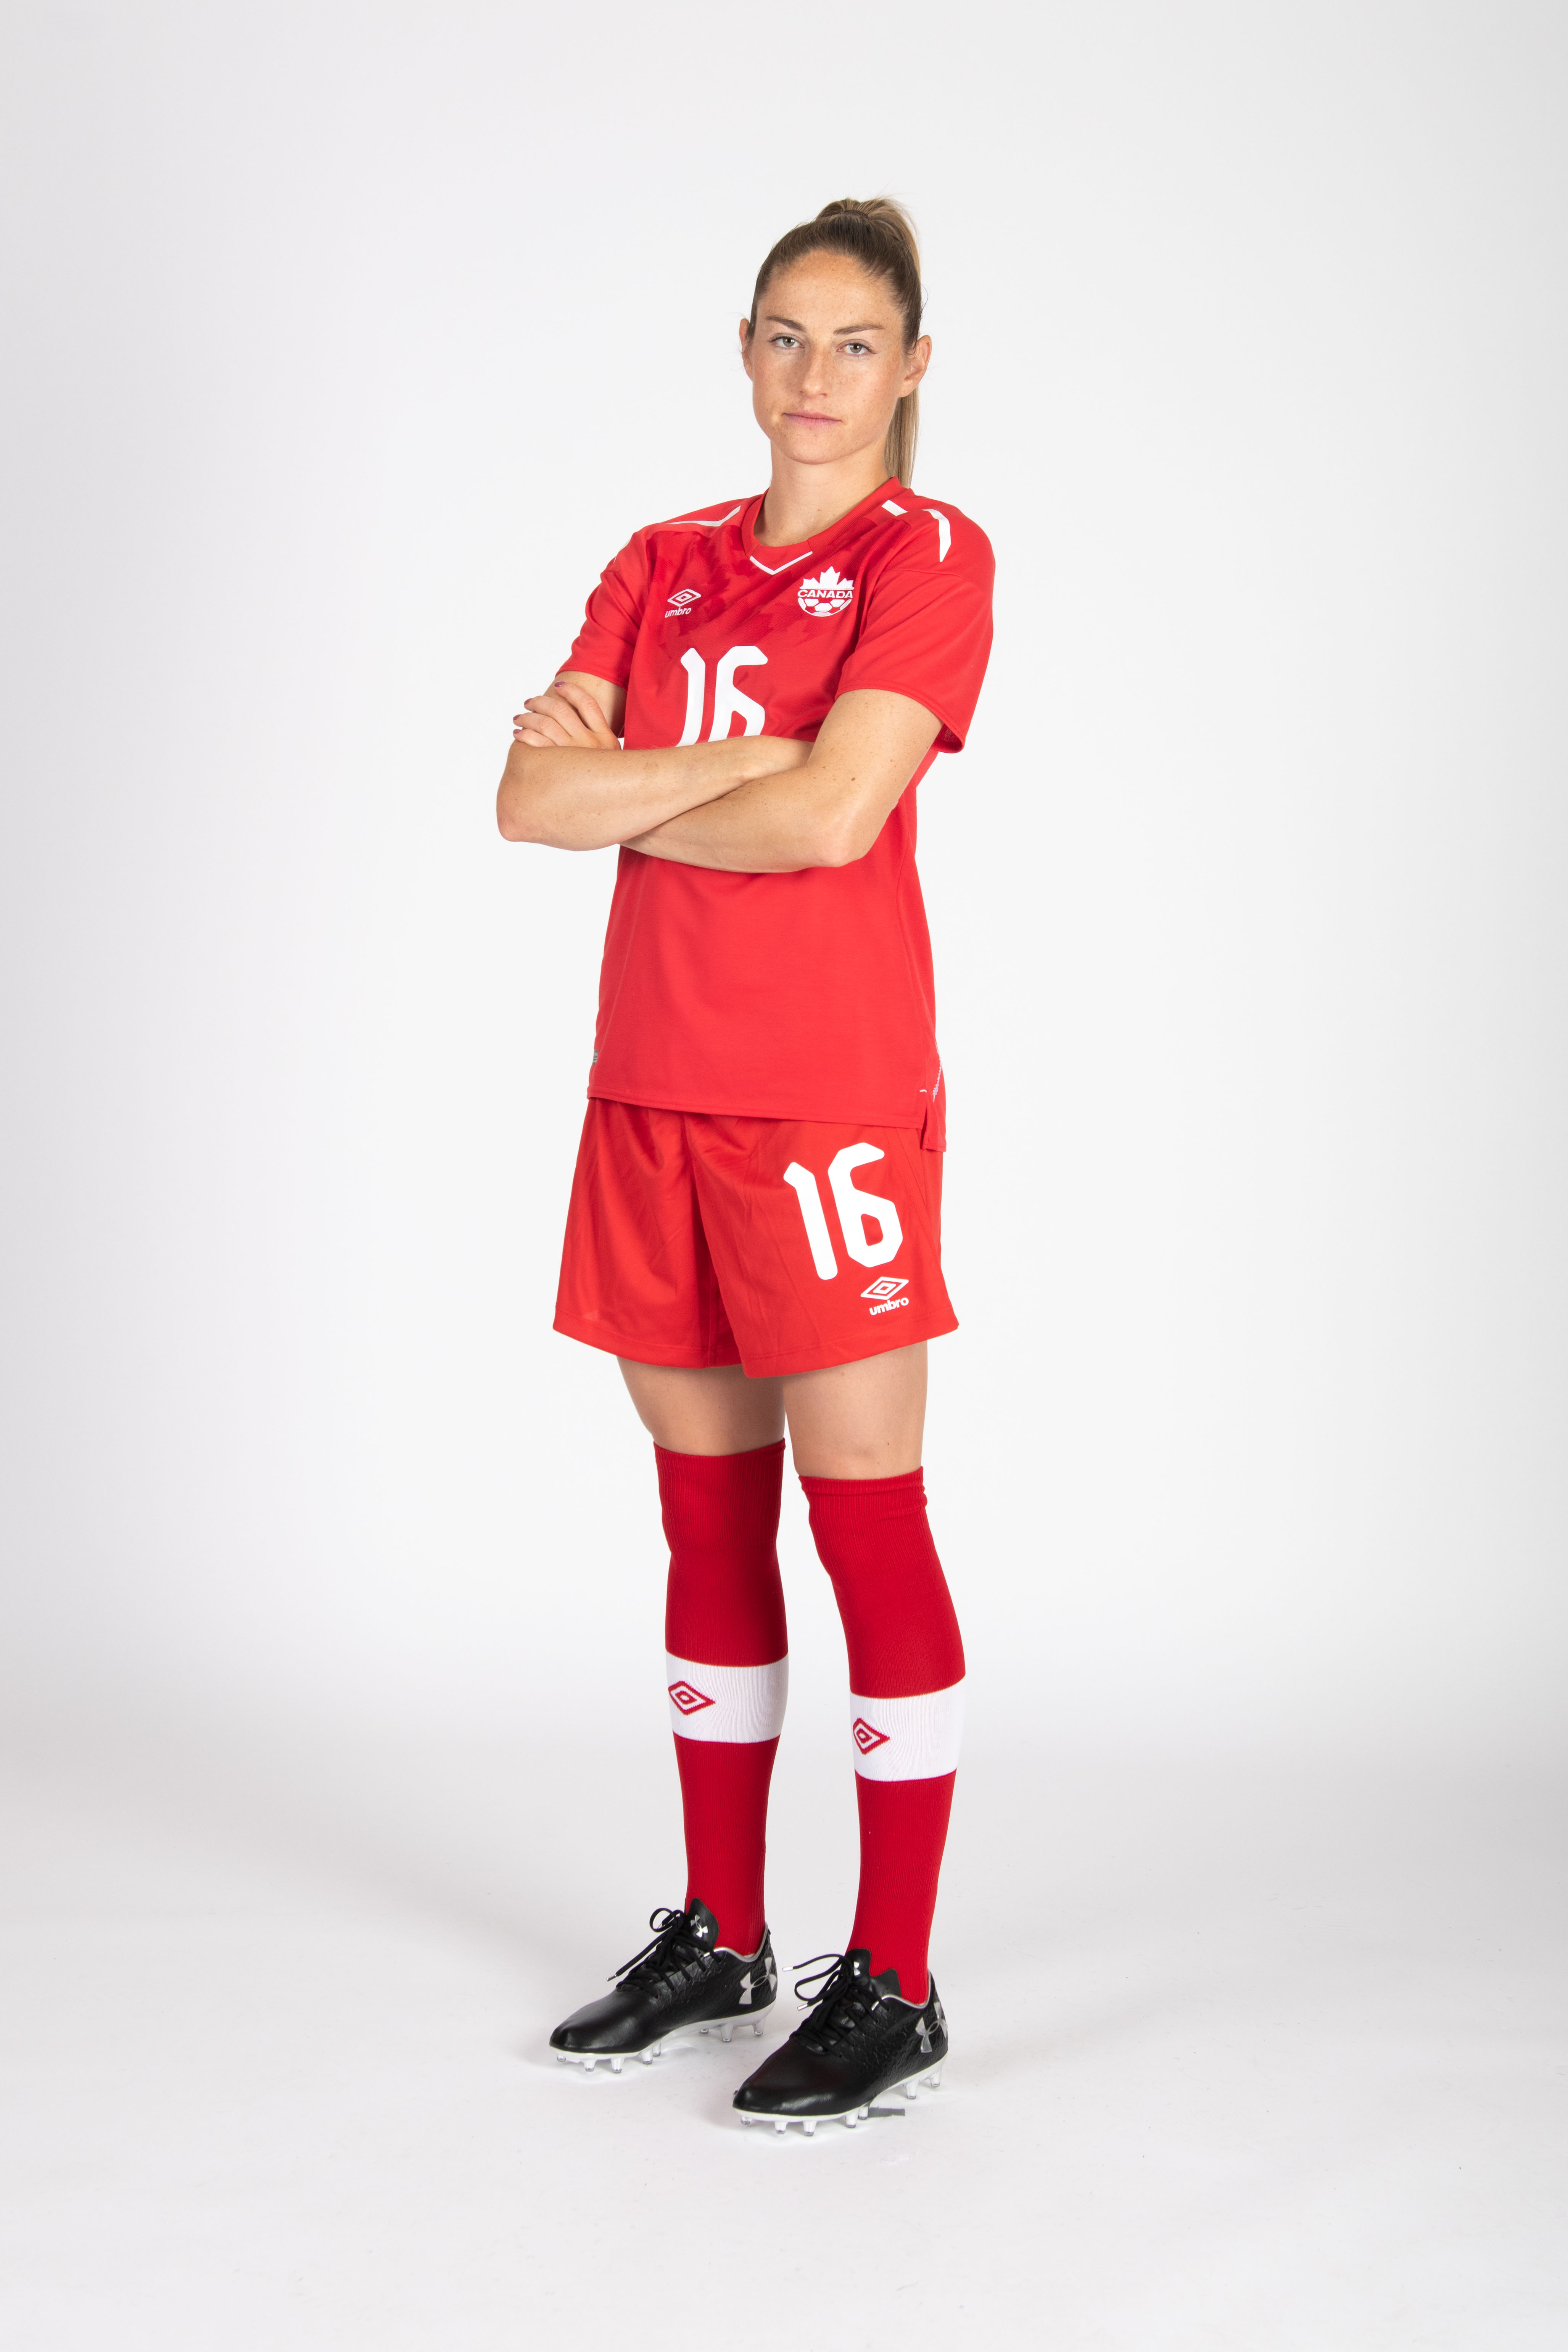 20180604_CANWNT_Beckie_byBazyl21